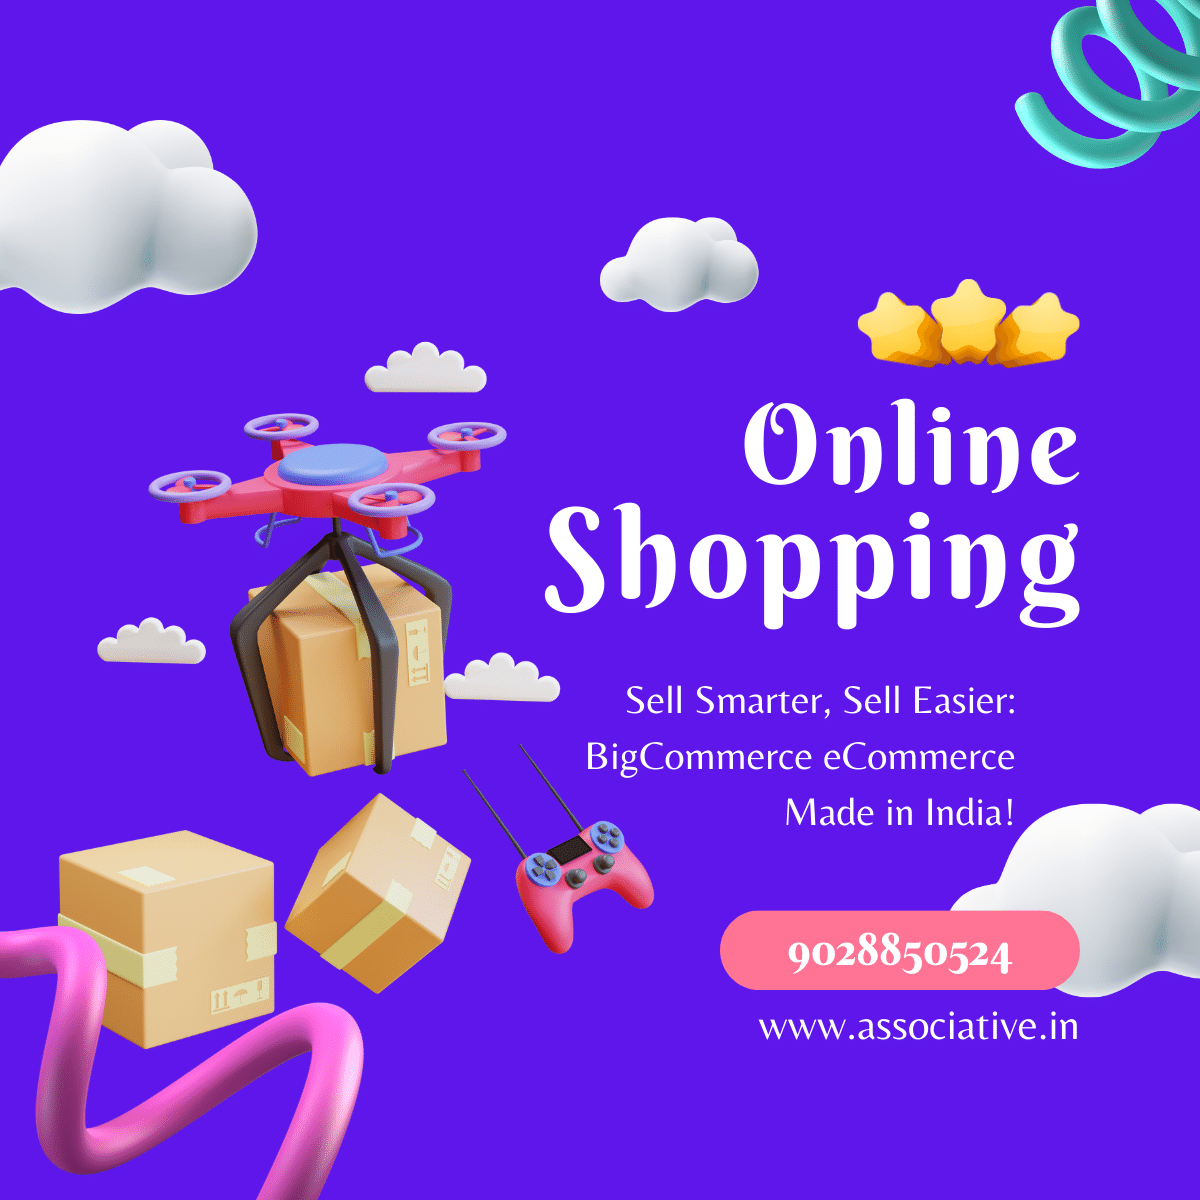 Sell Smarter, Sell Easier: BigCommerce eCommerce Made in India!